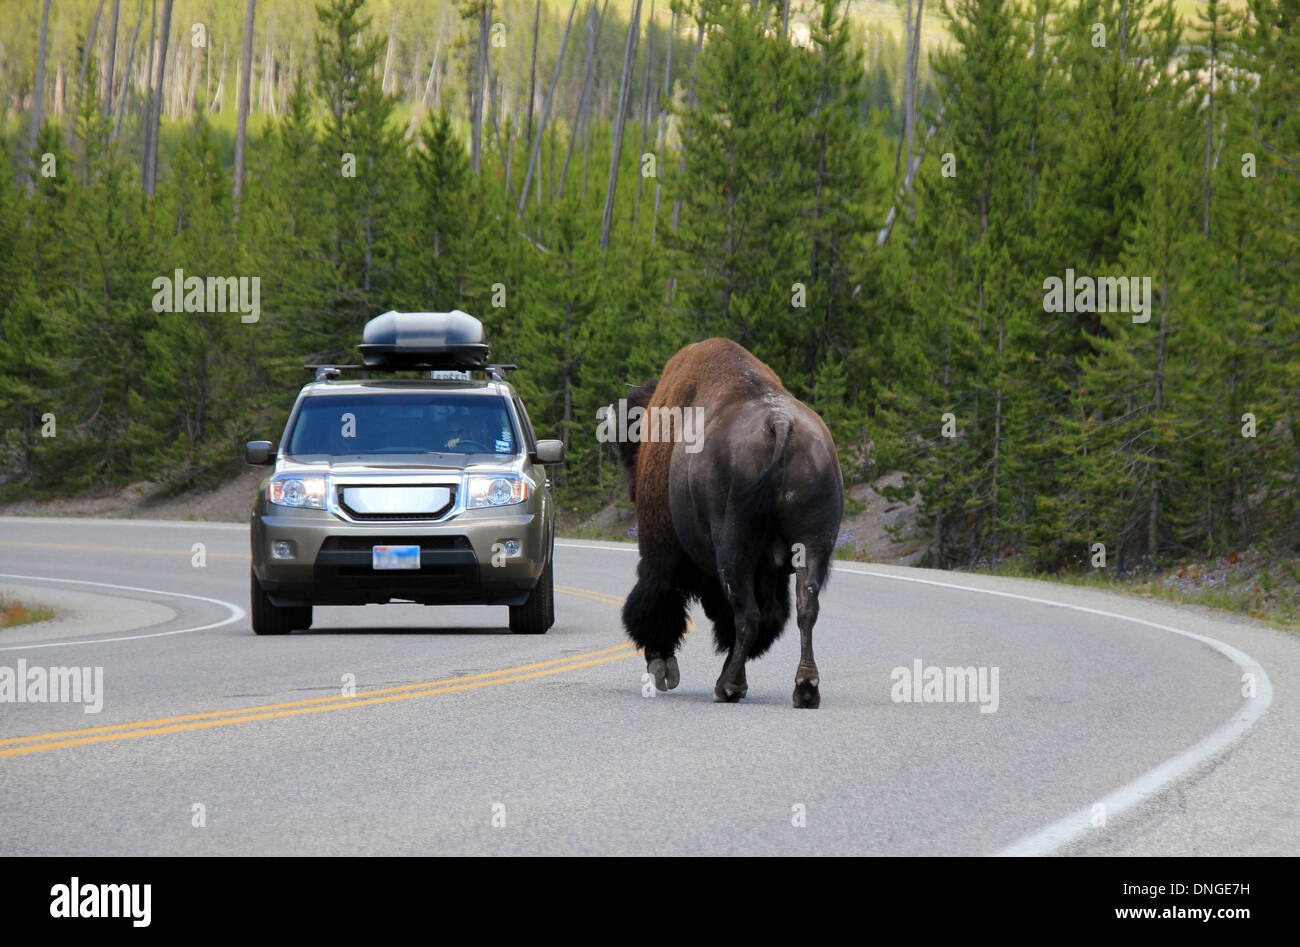 Bison (Bison Bison) Encounter on the Road, Yellowstone National Park, Wyoming, USA Stock Photo